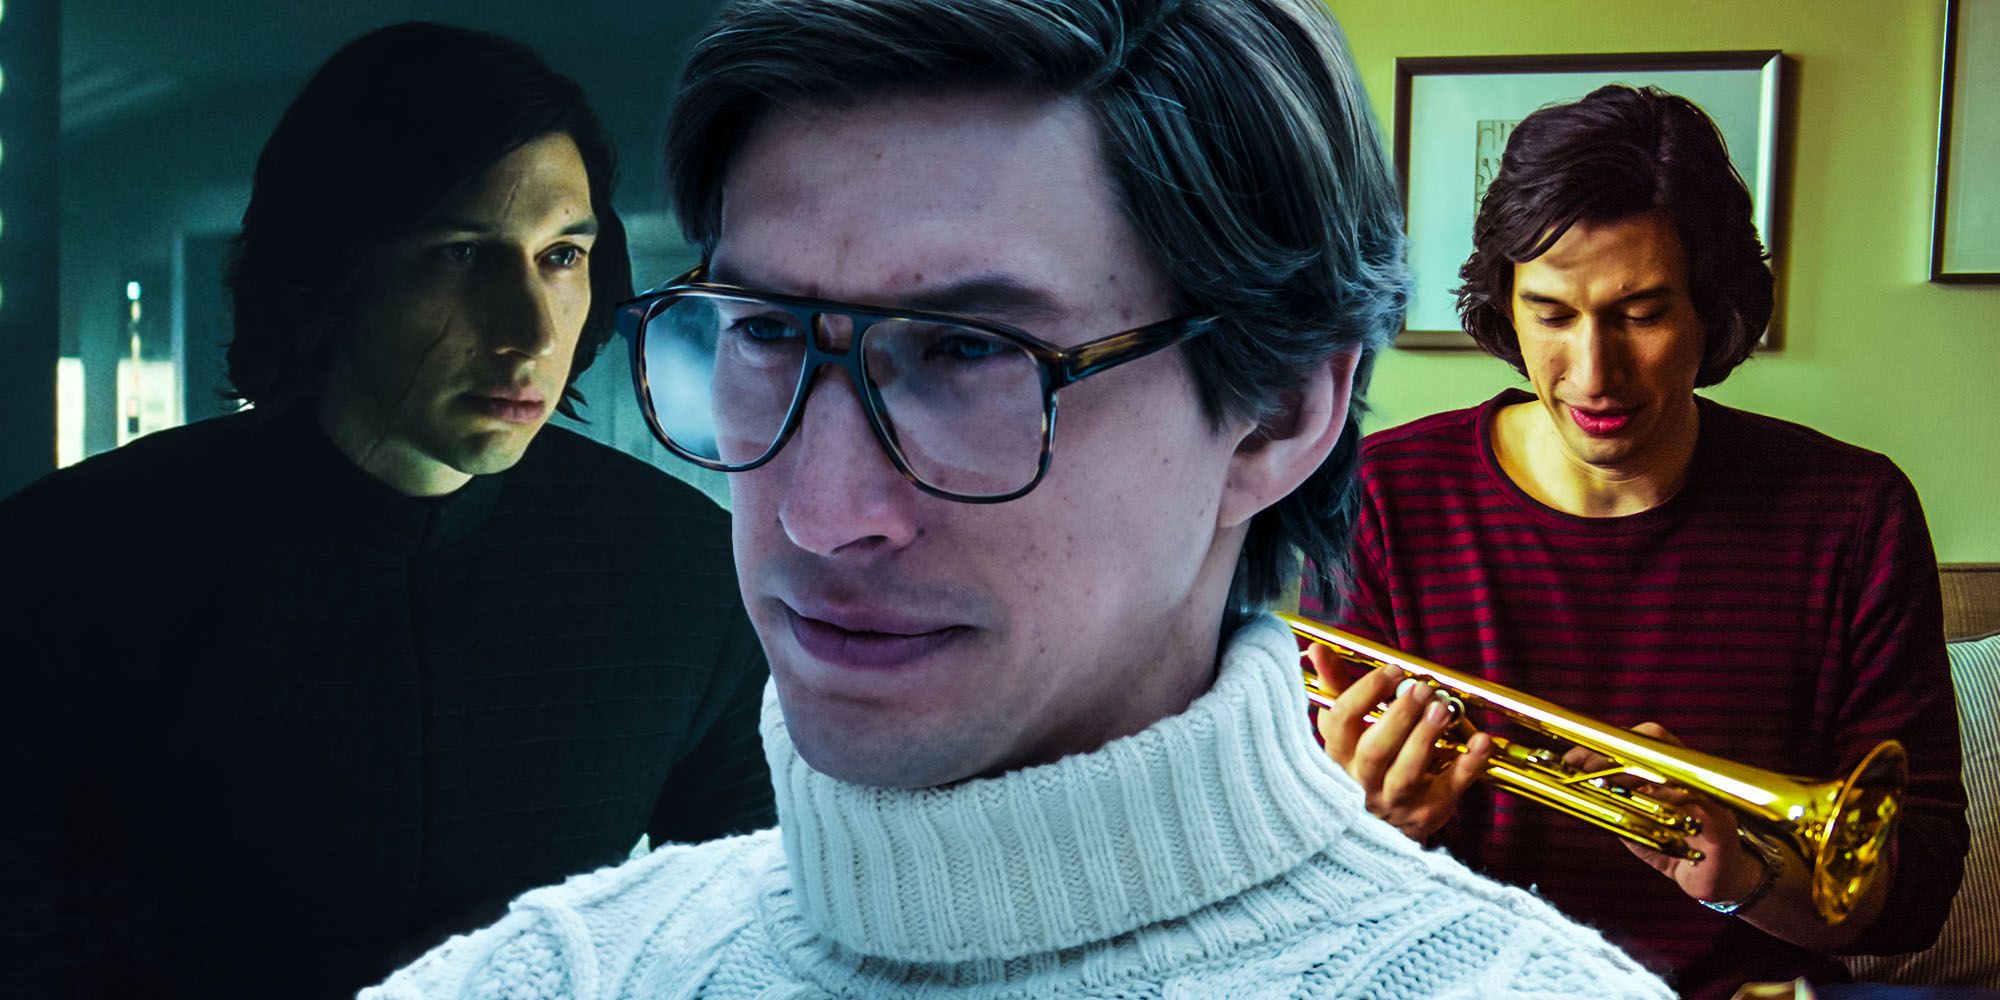 Adam driver movies ranked marriage story house of gucci last jedi